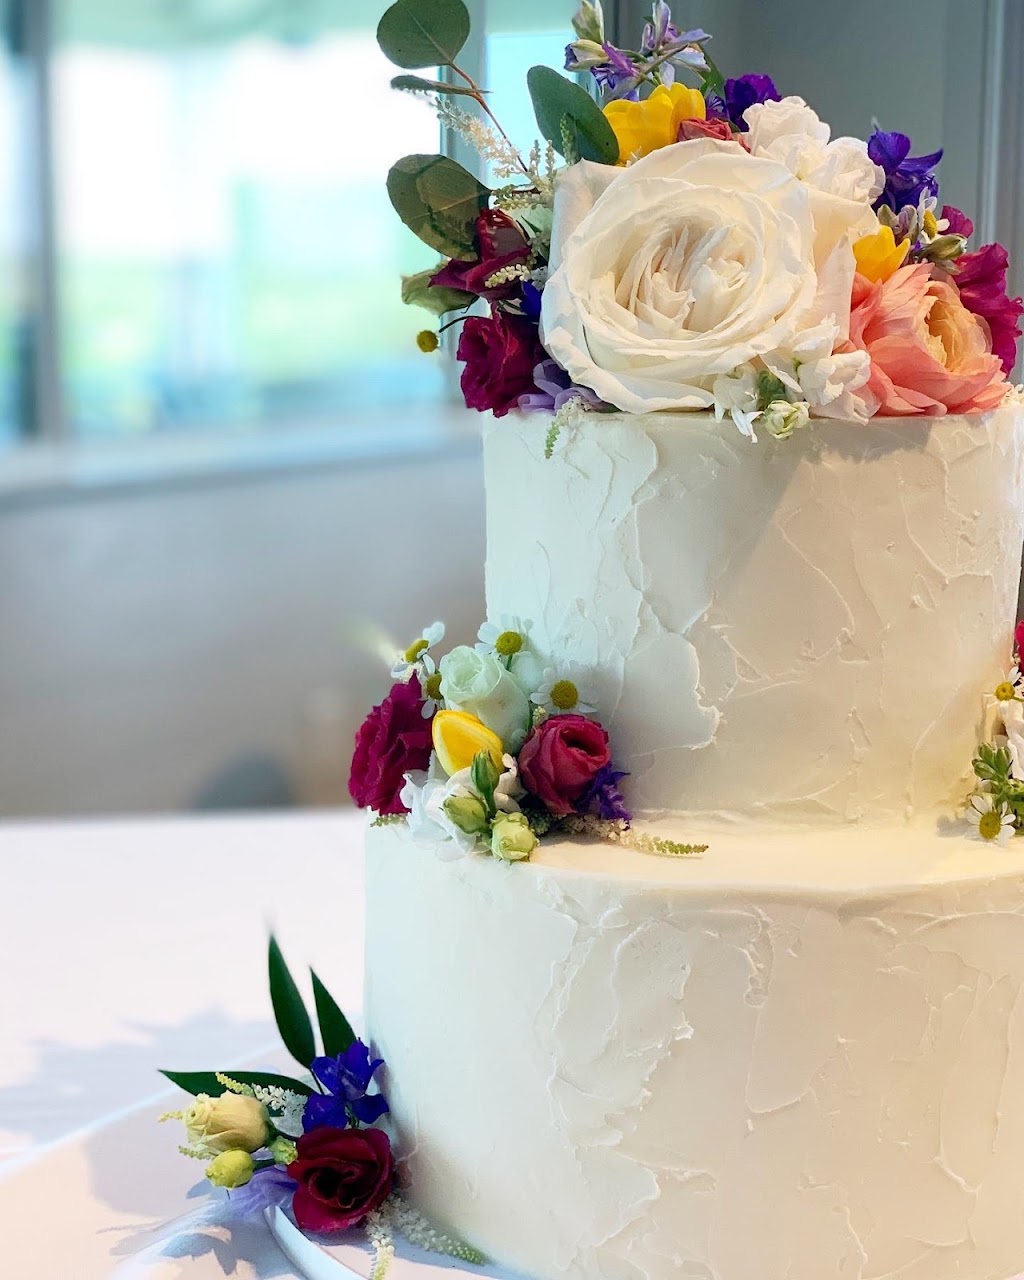 Storeybook Cakes, LLC | Not Open to the Public - Consultations by Appointment Only, 83 Prokop Rd Building 2 - Suite 3, Oxford, CT 06478 | Phone: (203) 560-4749